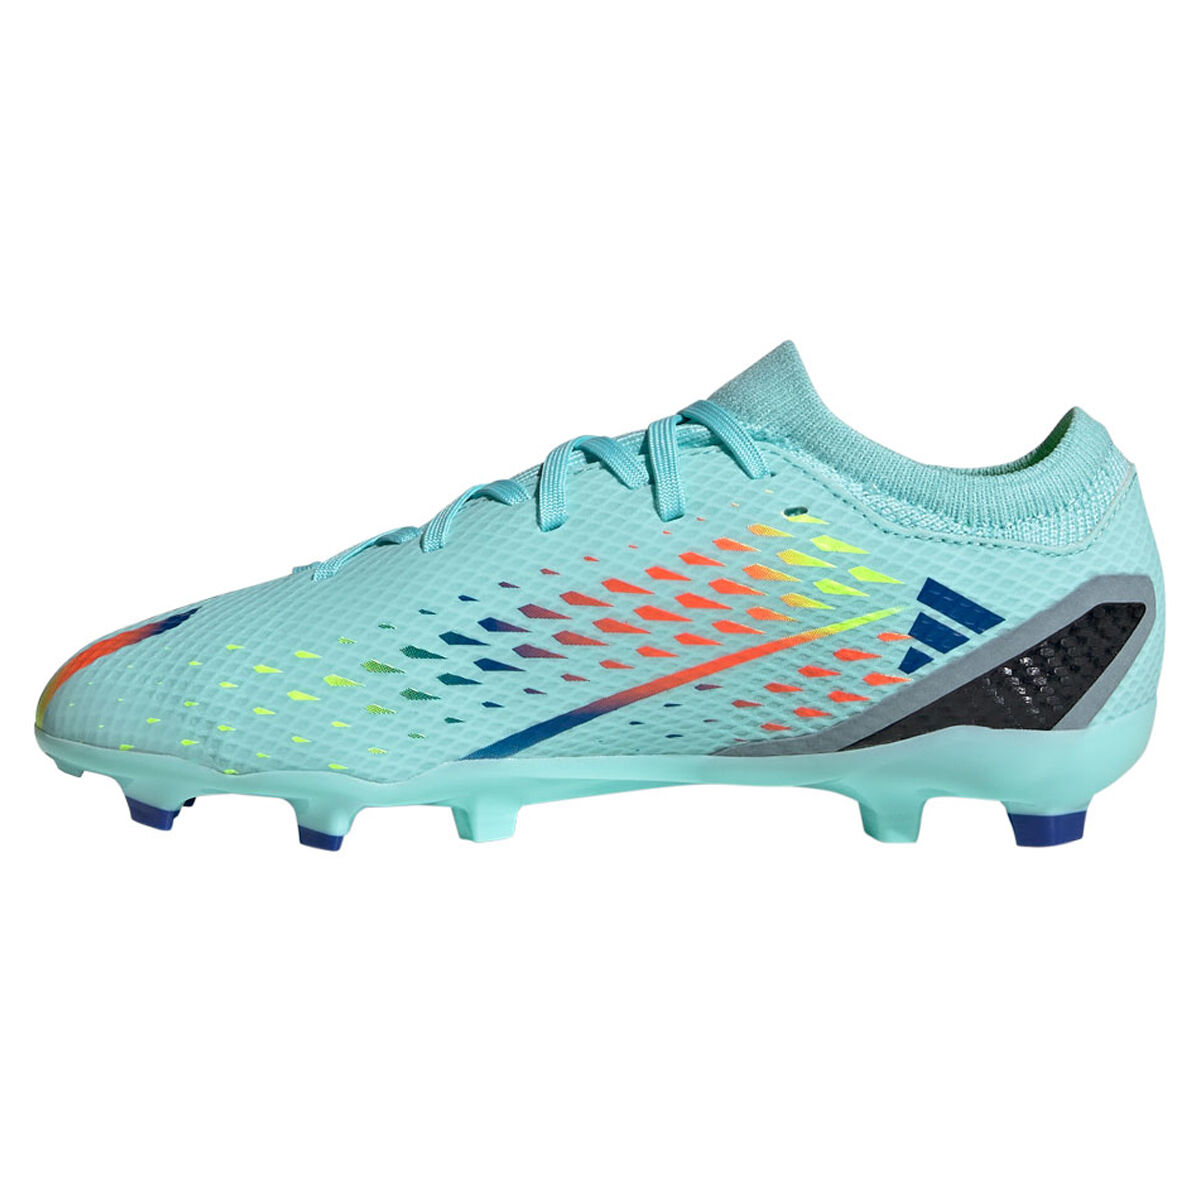 DIQUEQI Astro Turf Football Boots Boys Girls Football Trainers Soccer Athletics Training Shoes Teenager Outdoor Sport Shoes Sneakers for Unisex Kids 